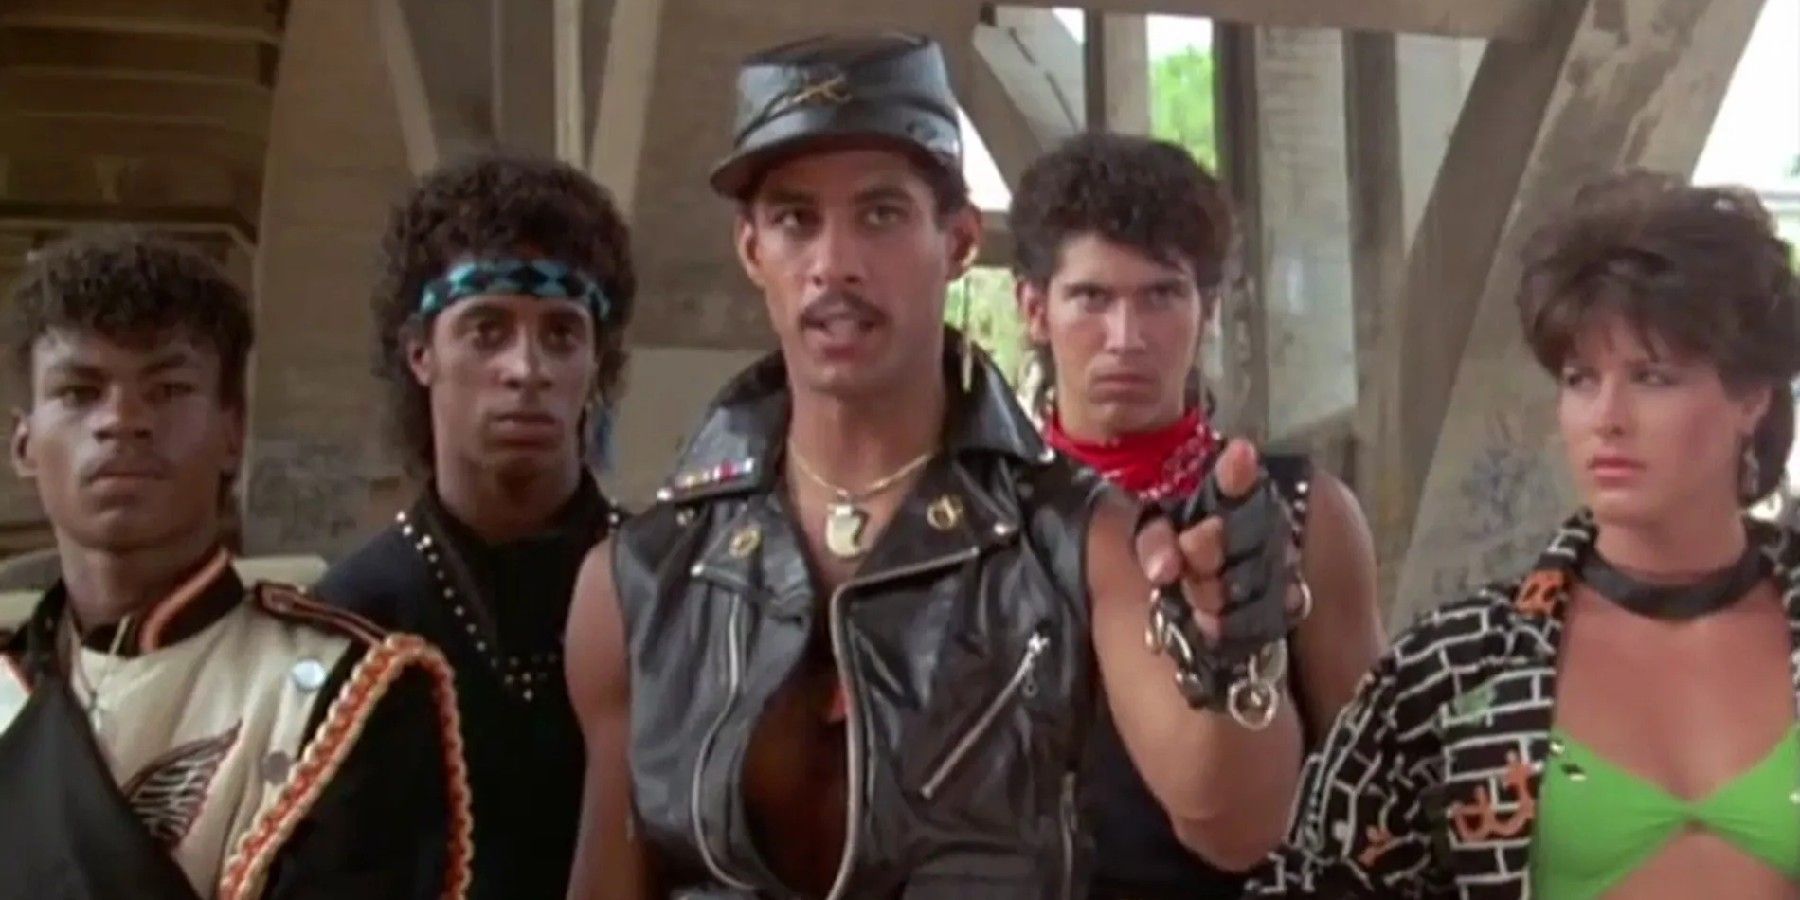 The cast of Breakin' 2: Electric Boogaloo faces the camera.